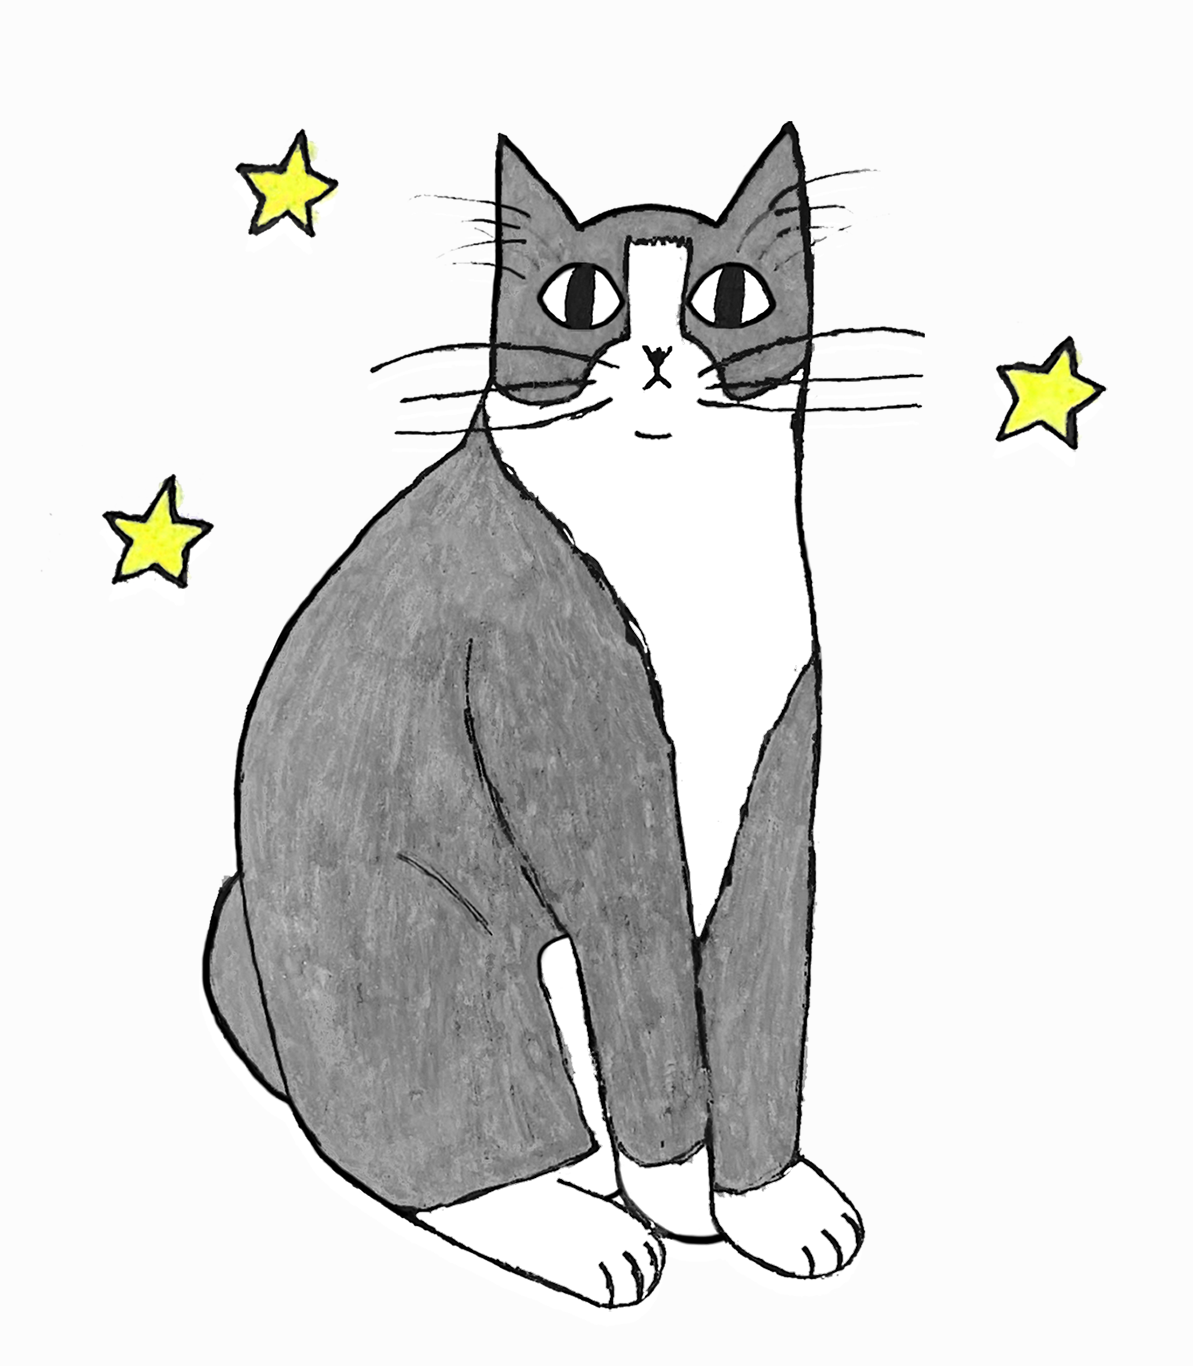 Stylized drawing of a tuxedo cat sitting on a slightly off-white background with 3 small yellow stars scattered around him.